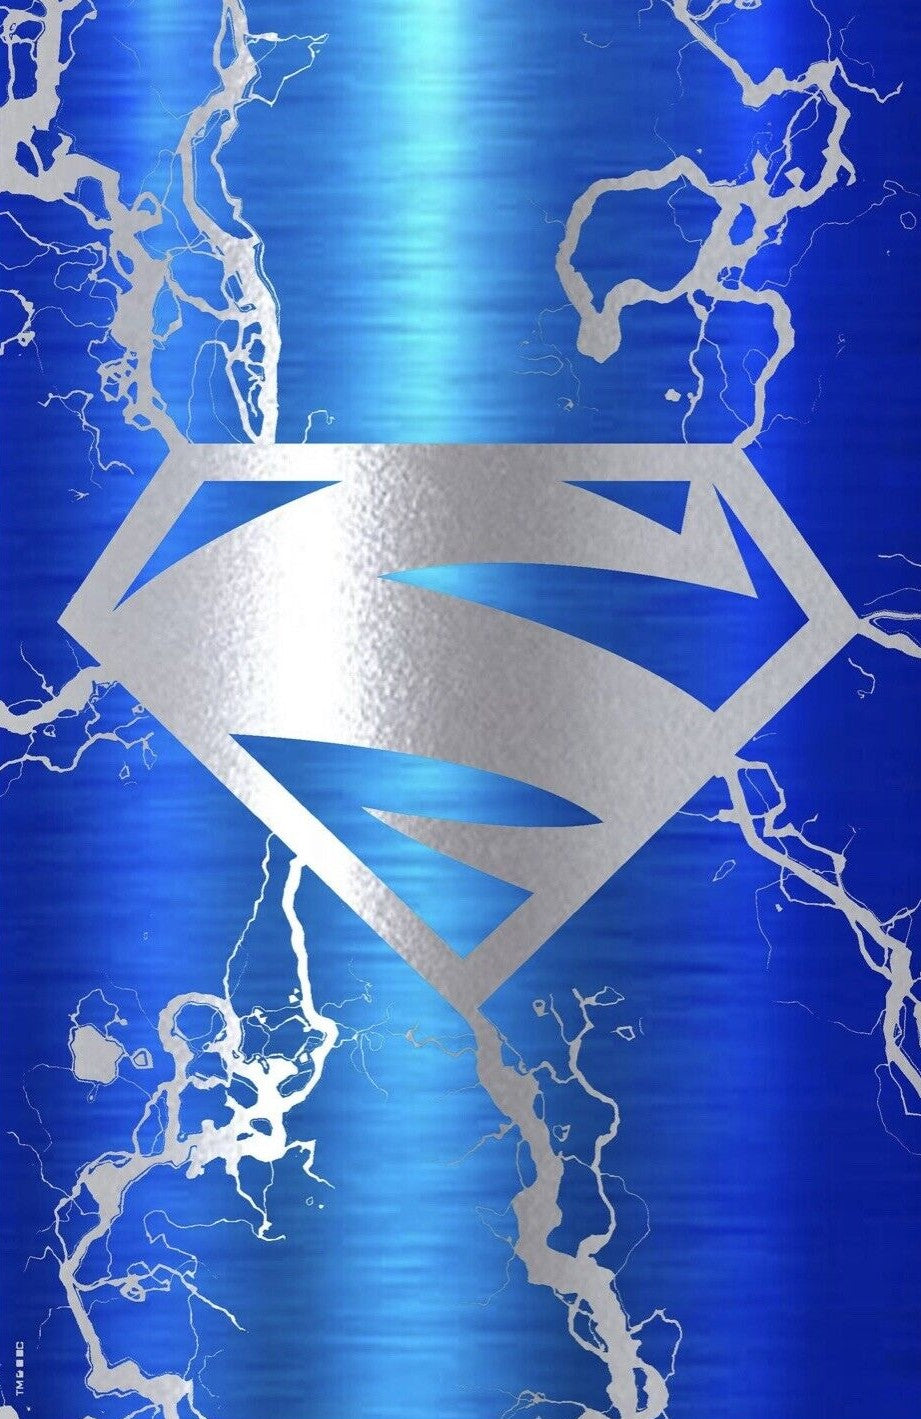 ADVENTURES OF SUPERMAN JON KENT #1 BLUE FOIL VARIANT LIMITED TO 1000 COPIES